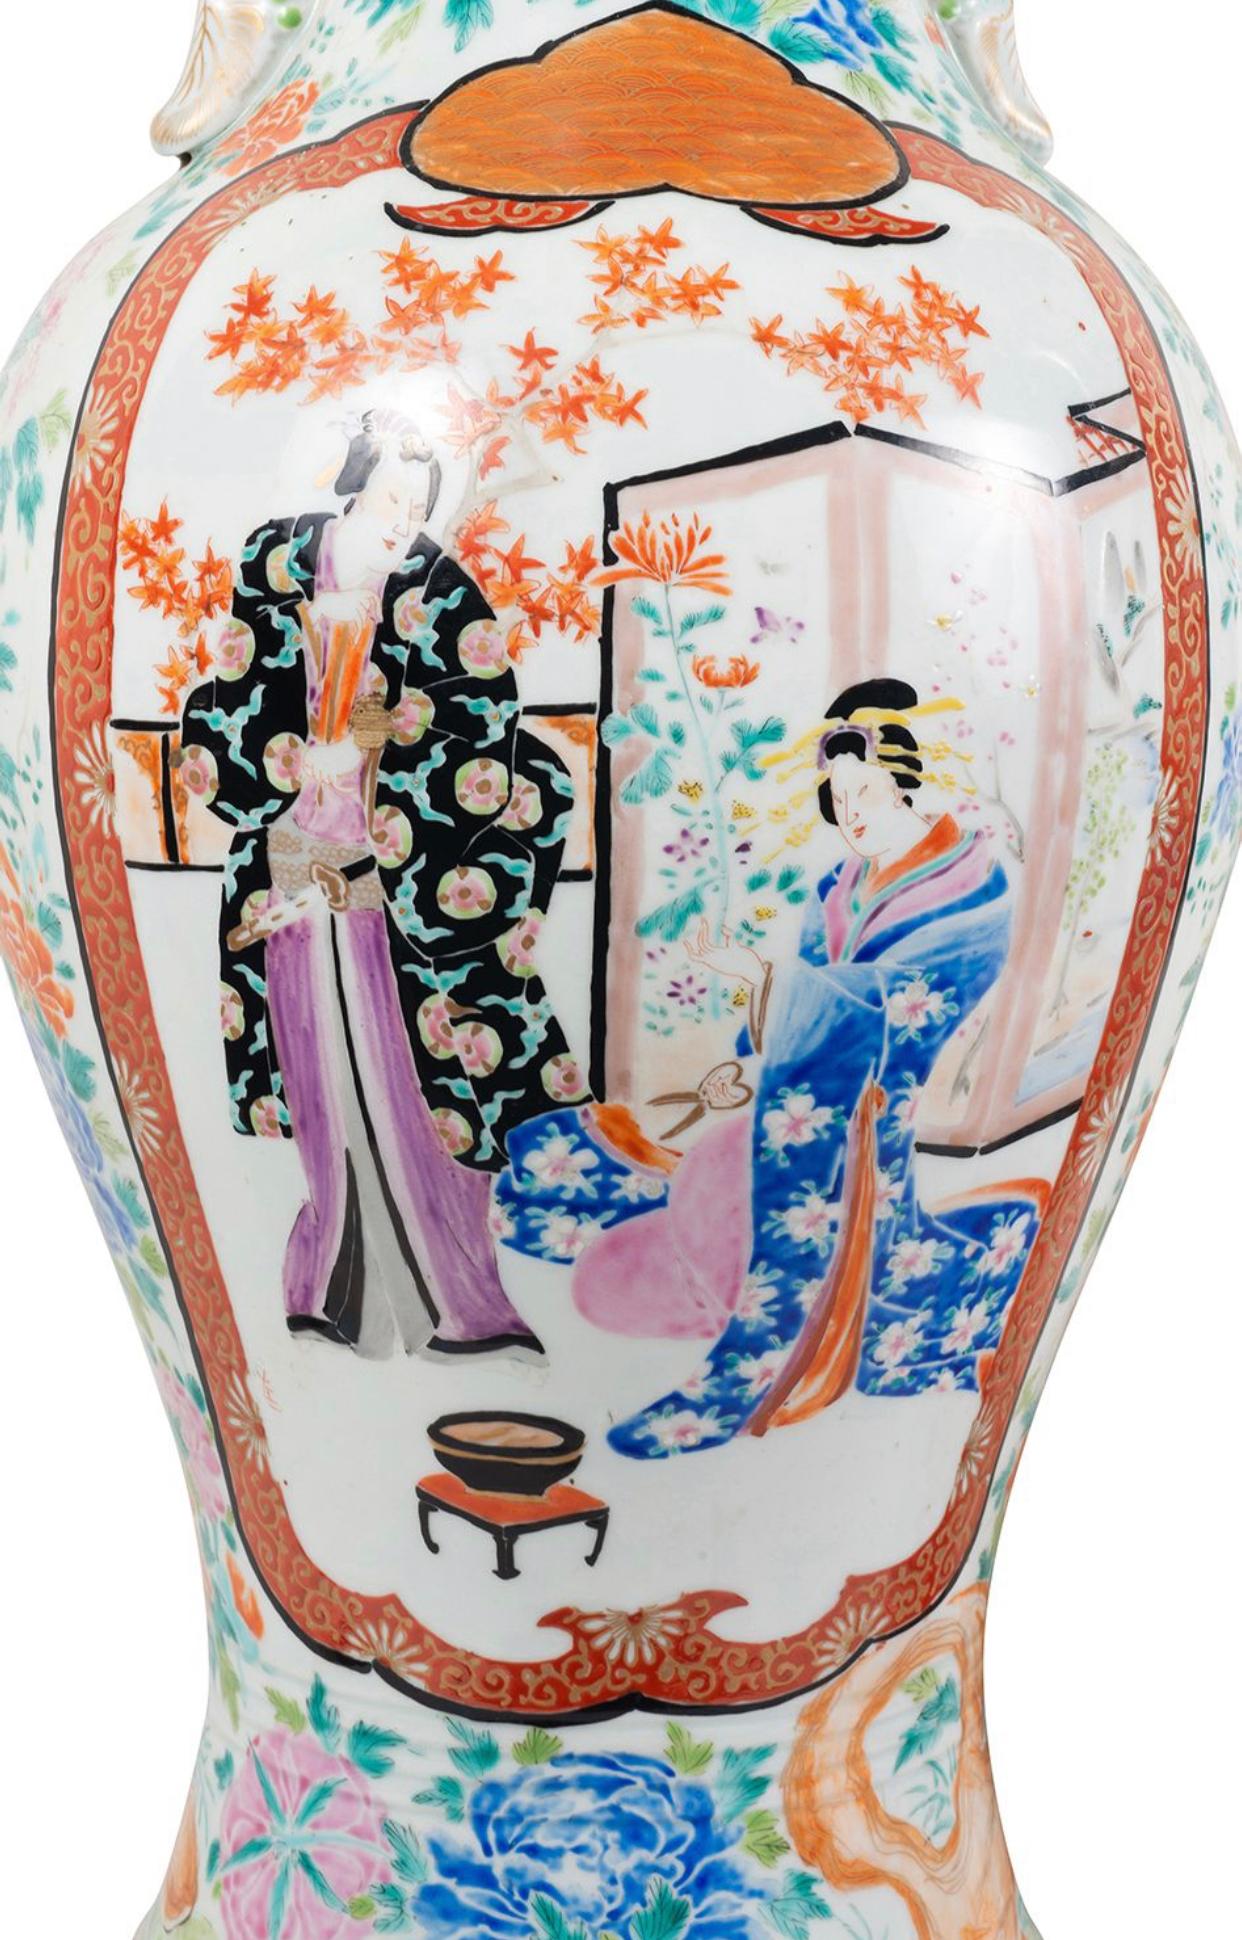 An impressive and very decorative pair of Meiji period (1868-1912) Japanese Kutani porcelain vases, each with wonderful exotic floral decoration to the ground, inset hand painted panels depicting a swords man looking over a Geisha girl cutting